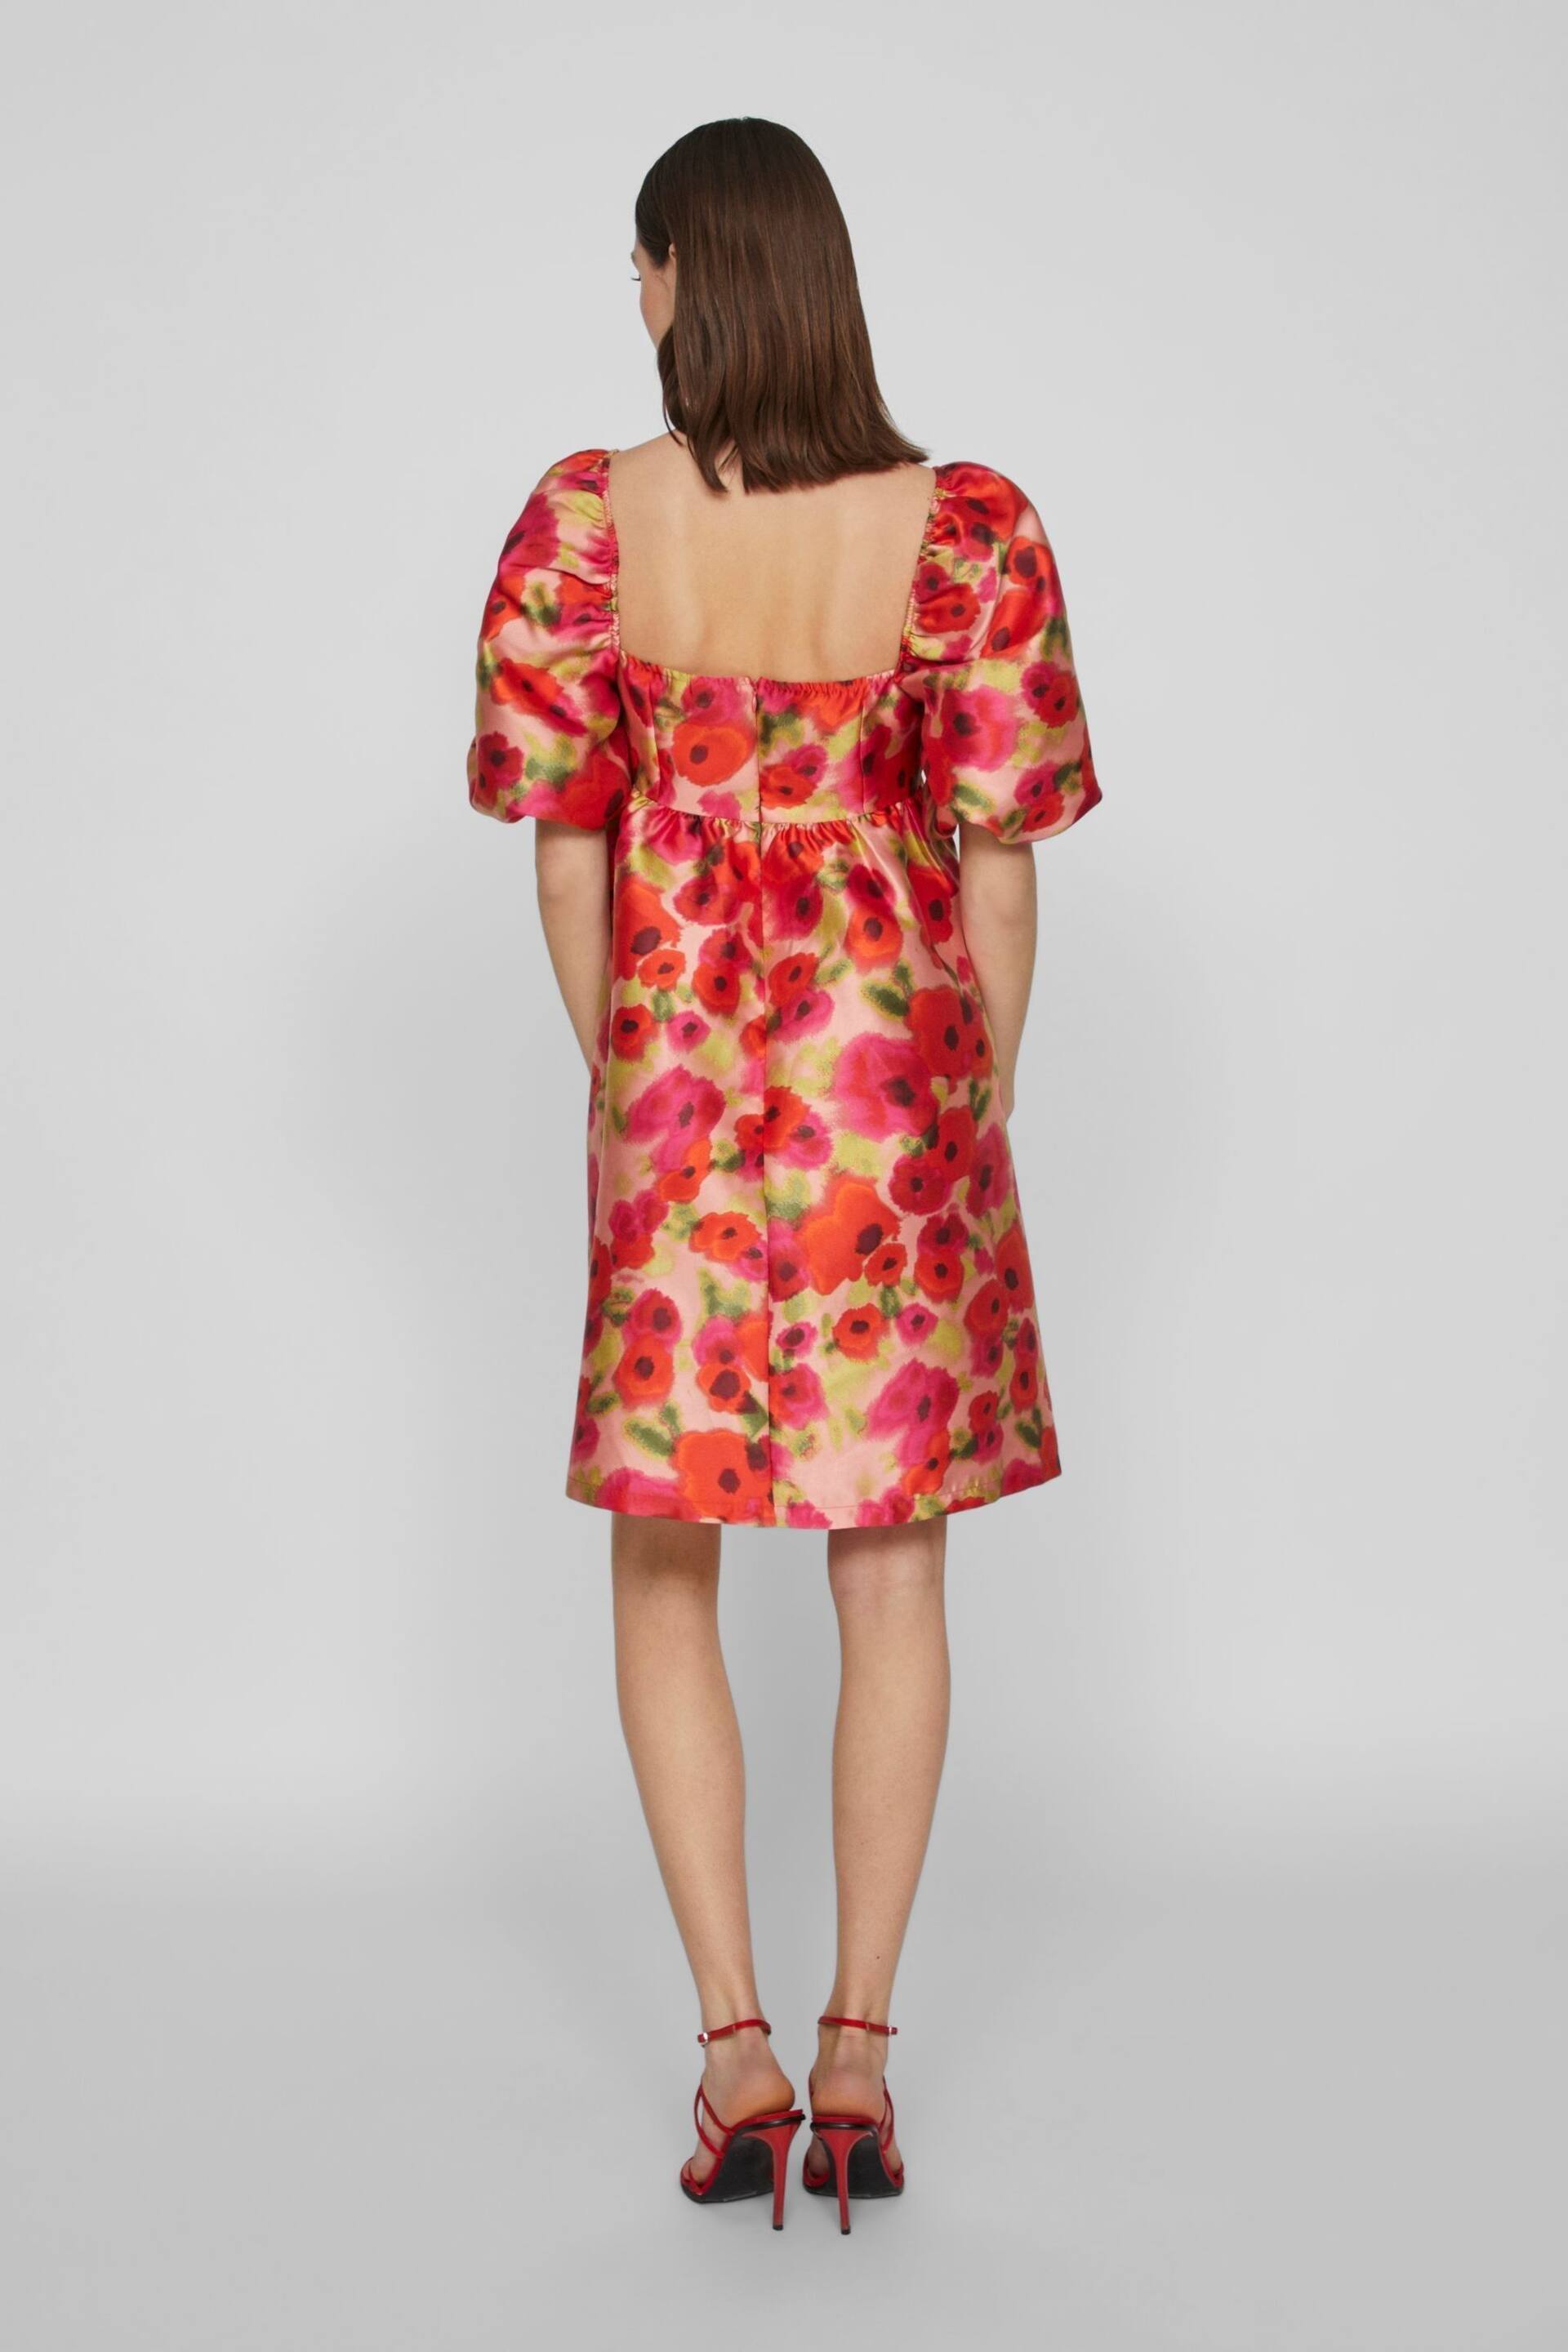 VILA Red Floral Baroque Puff Sleeve Mini Occasion Dress - Image 2 of 7